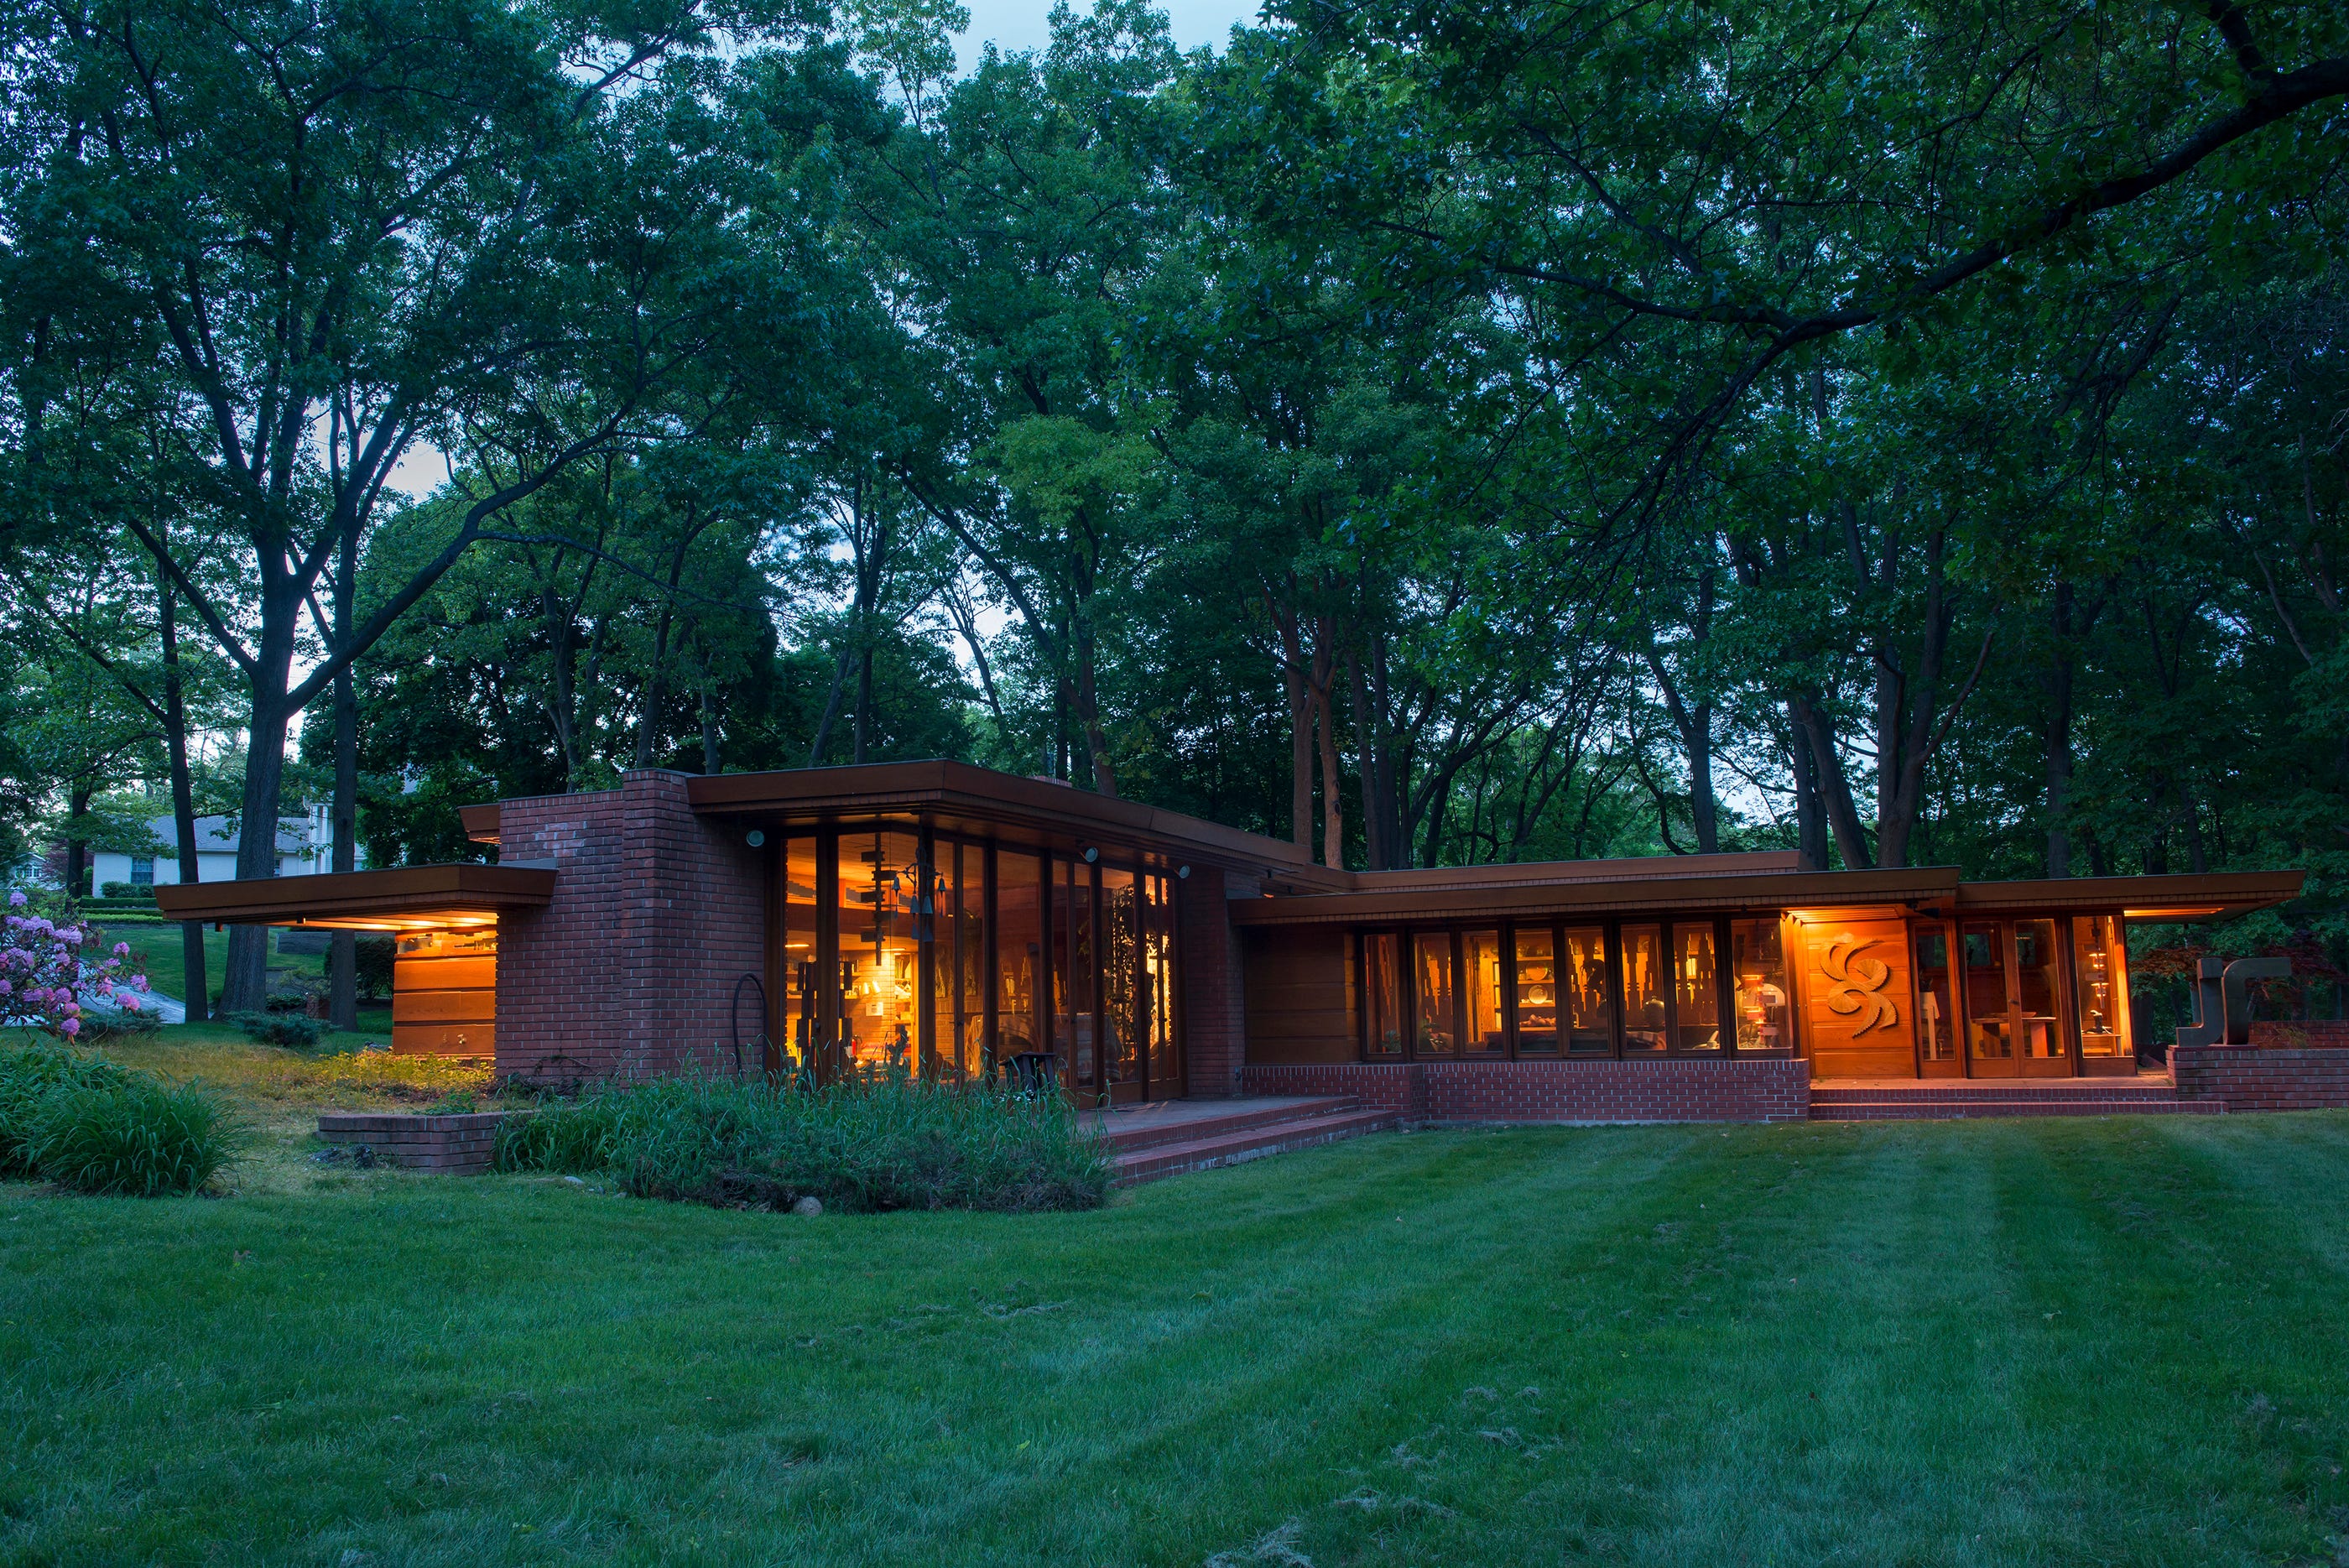 The Smith House, designed by Frank Lloyd Wright in 1949, was built by Detroit school teachers Melvyn Smith and Sara Stein. The family later donated the house to Cranbrook. It'll reopen for tours in May.